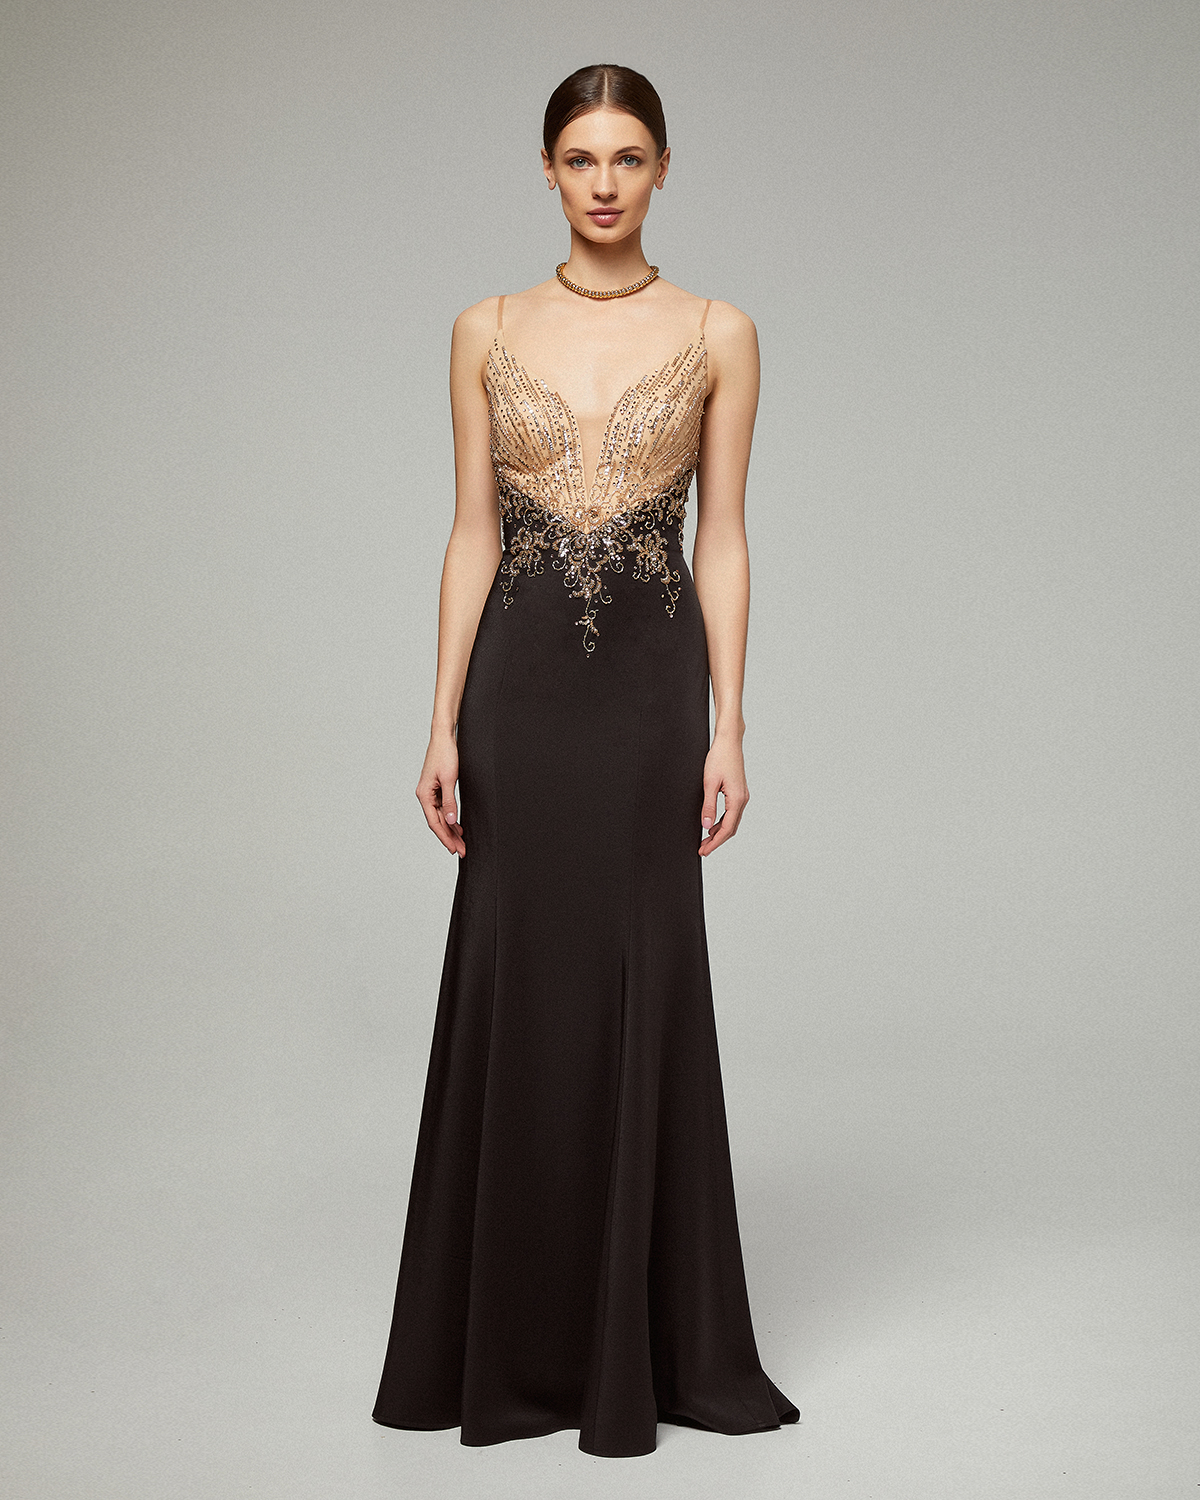 Evening Dresses / Long evening dress with beading on the top and open back